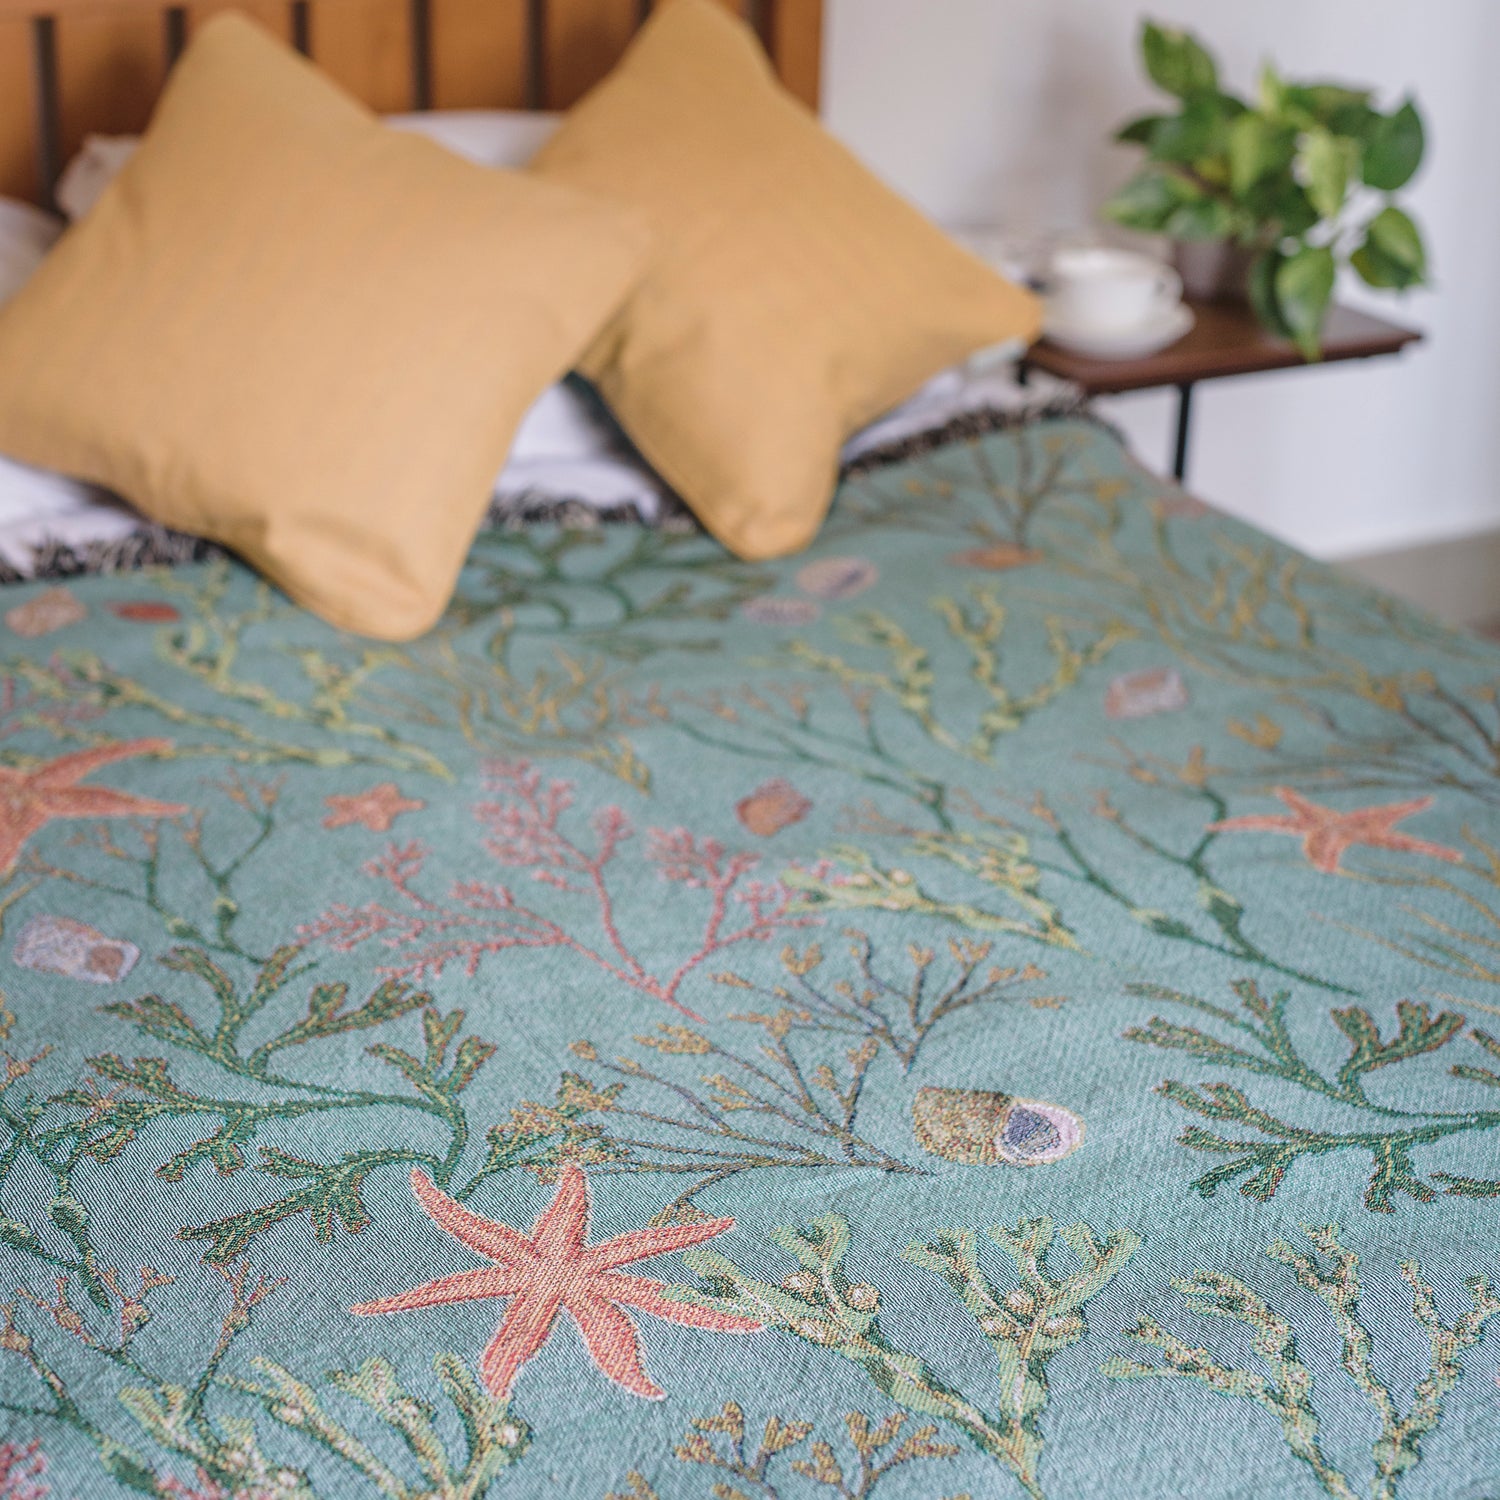 A bed with an Intertidal Star blanket and Arcana pillows on it.